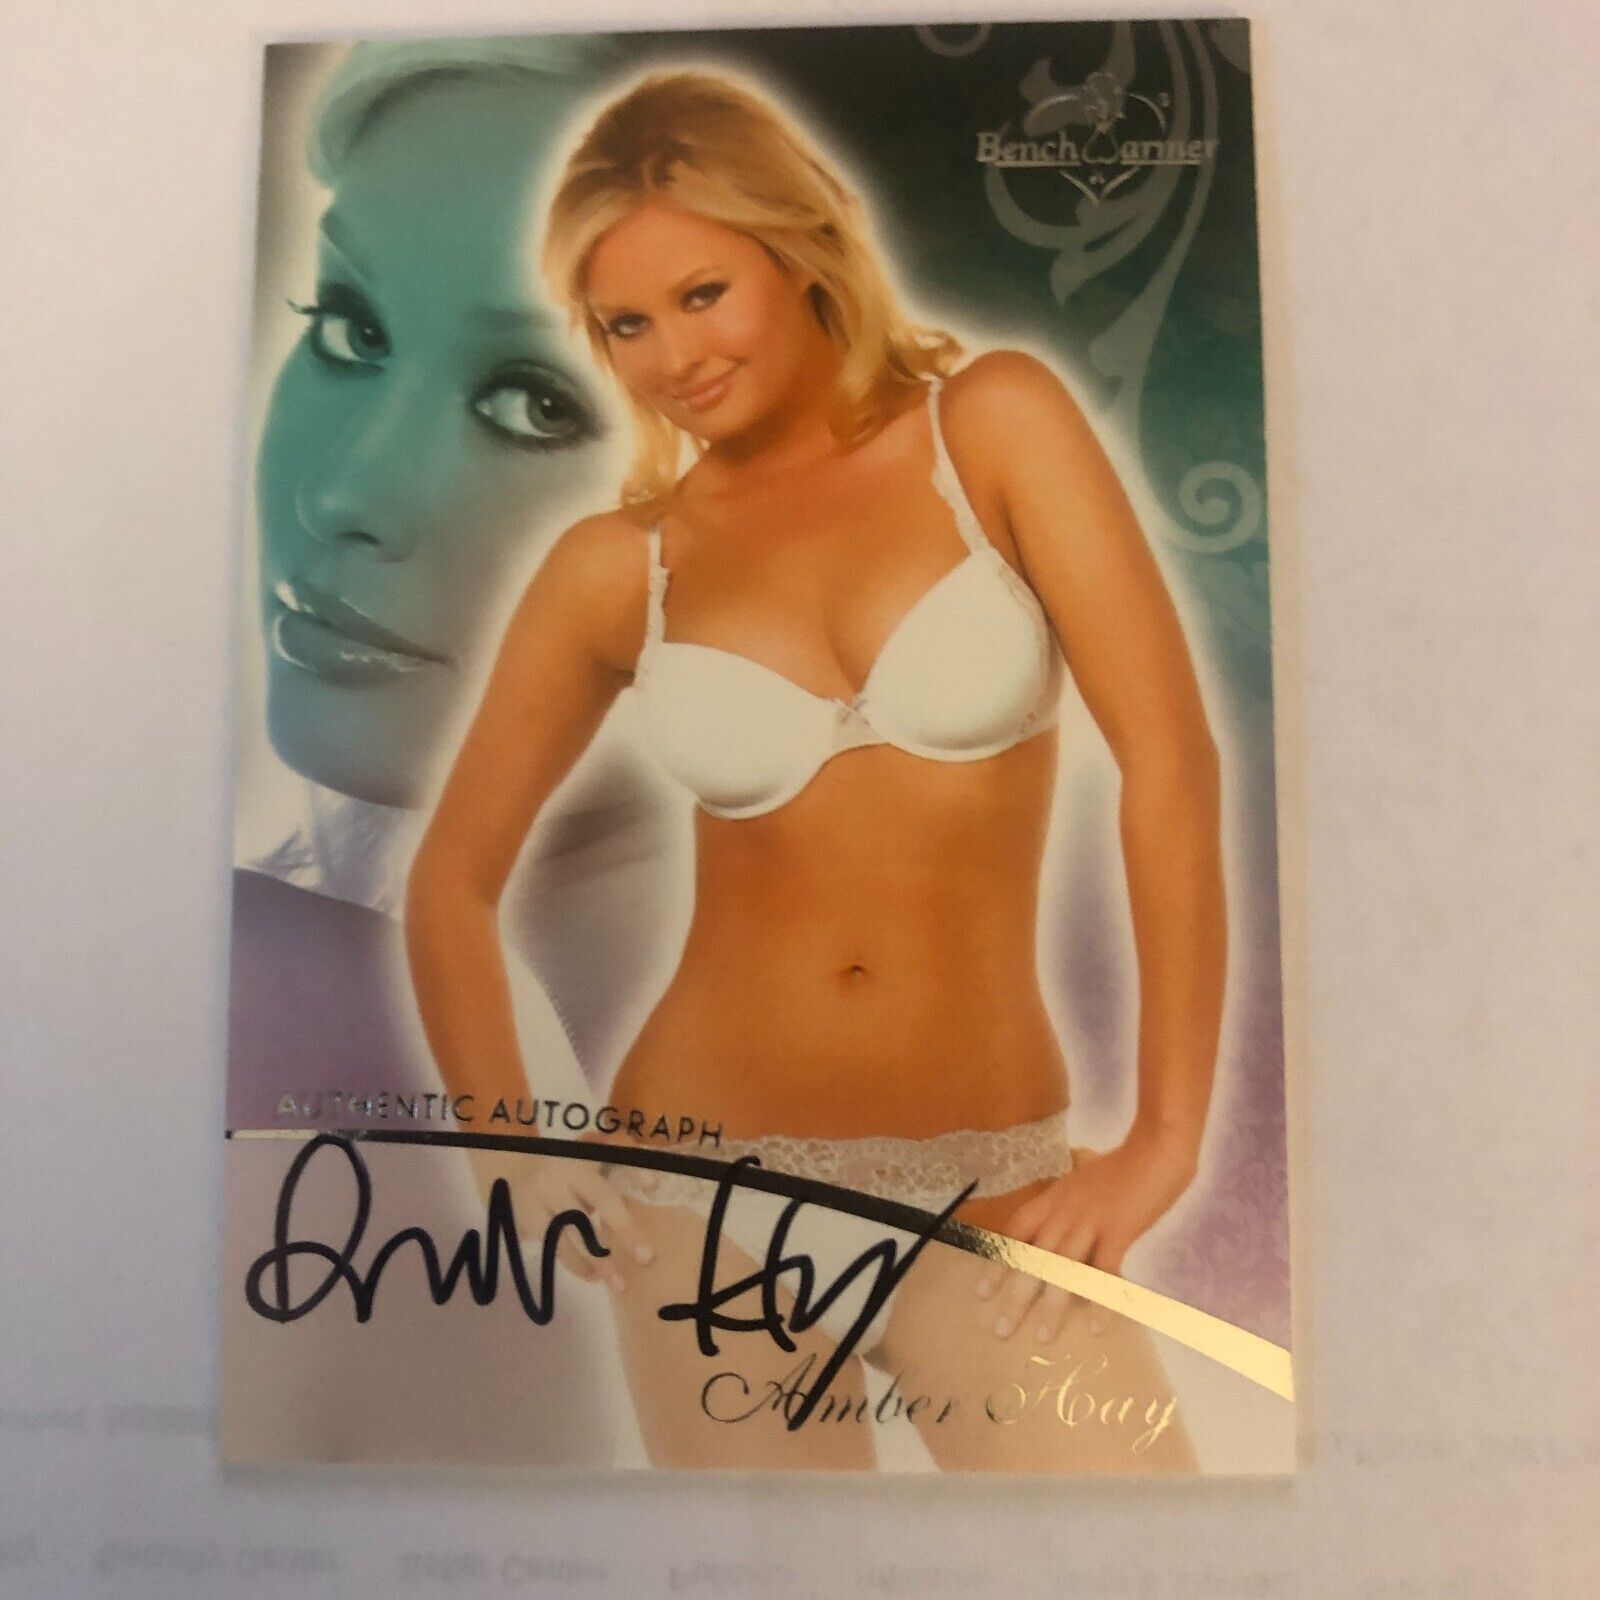 2007 Amber Hay,  Authentic Autograph,  Benchwarmer, Card, #16 of 24,